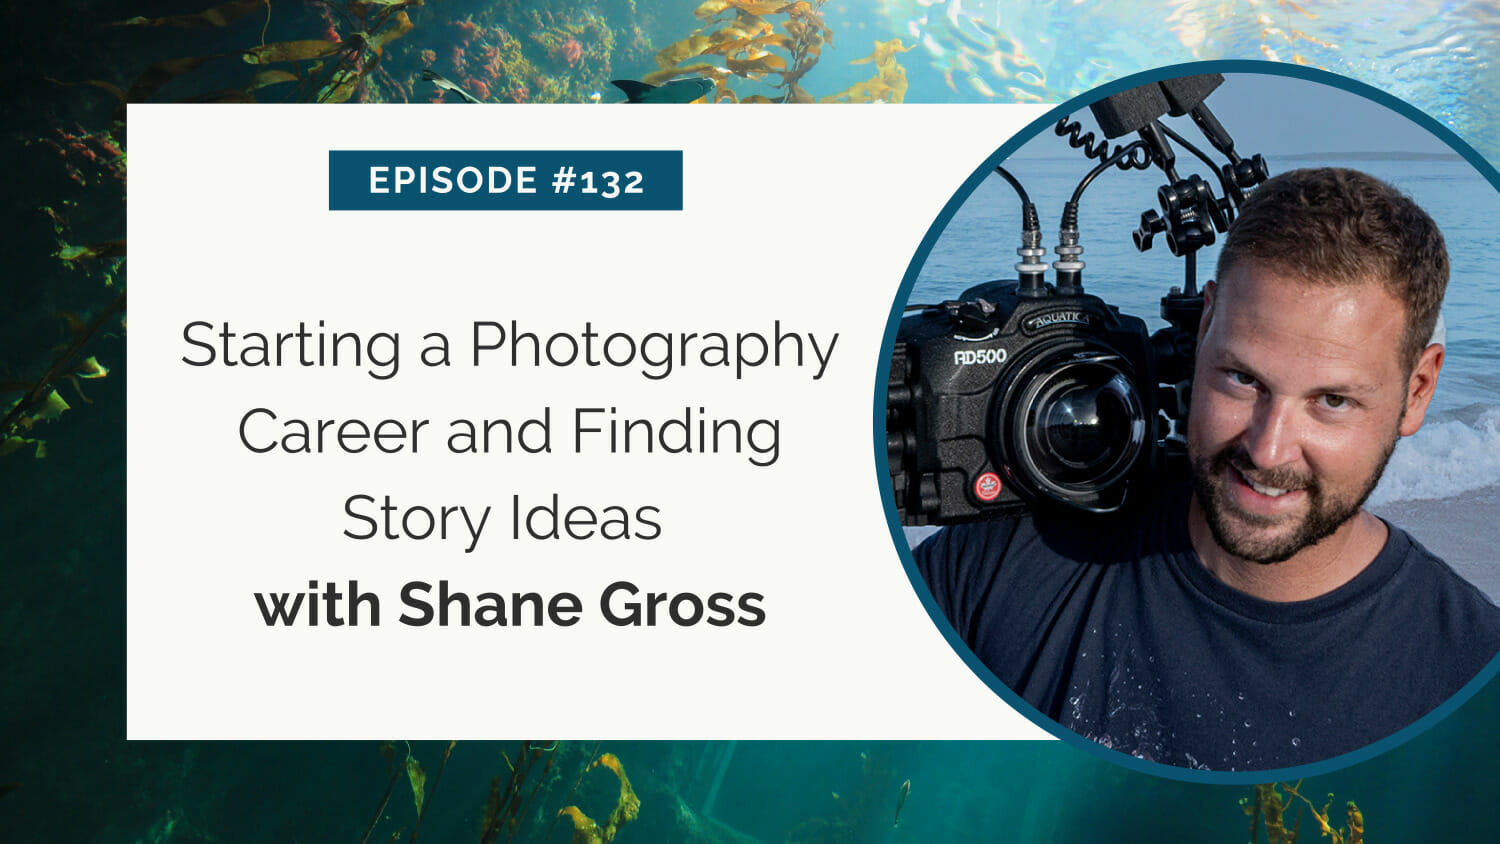 Professional underwater photographer with camera gear, promoting an episode on starting a photography career and finding story ideas.